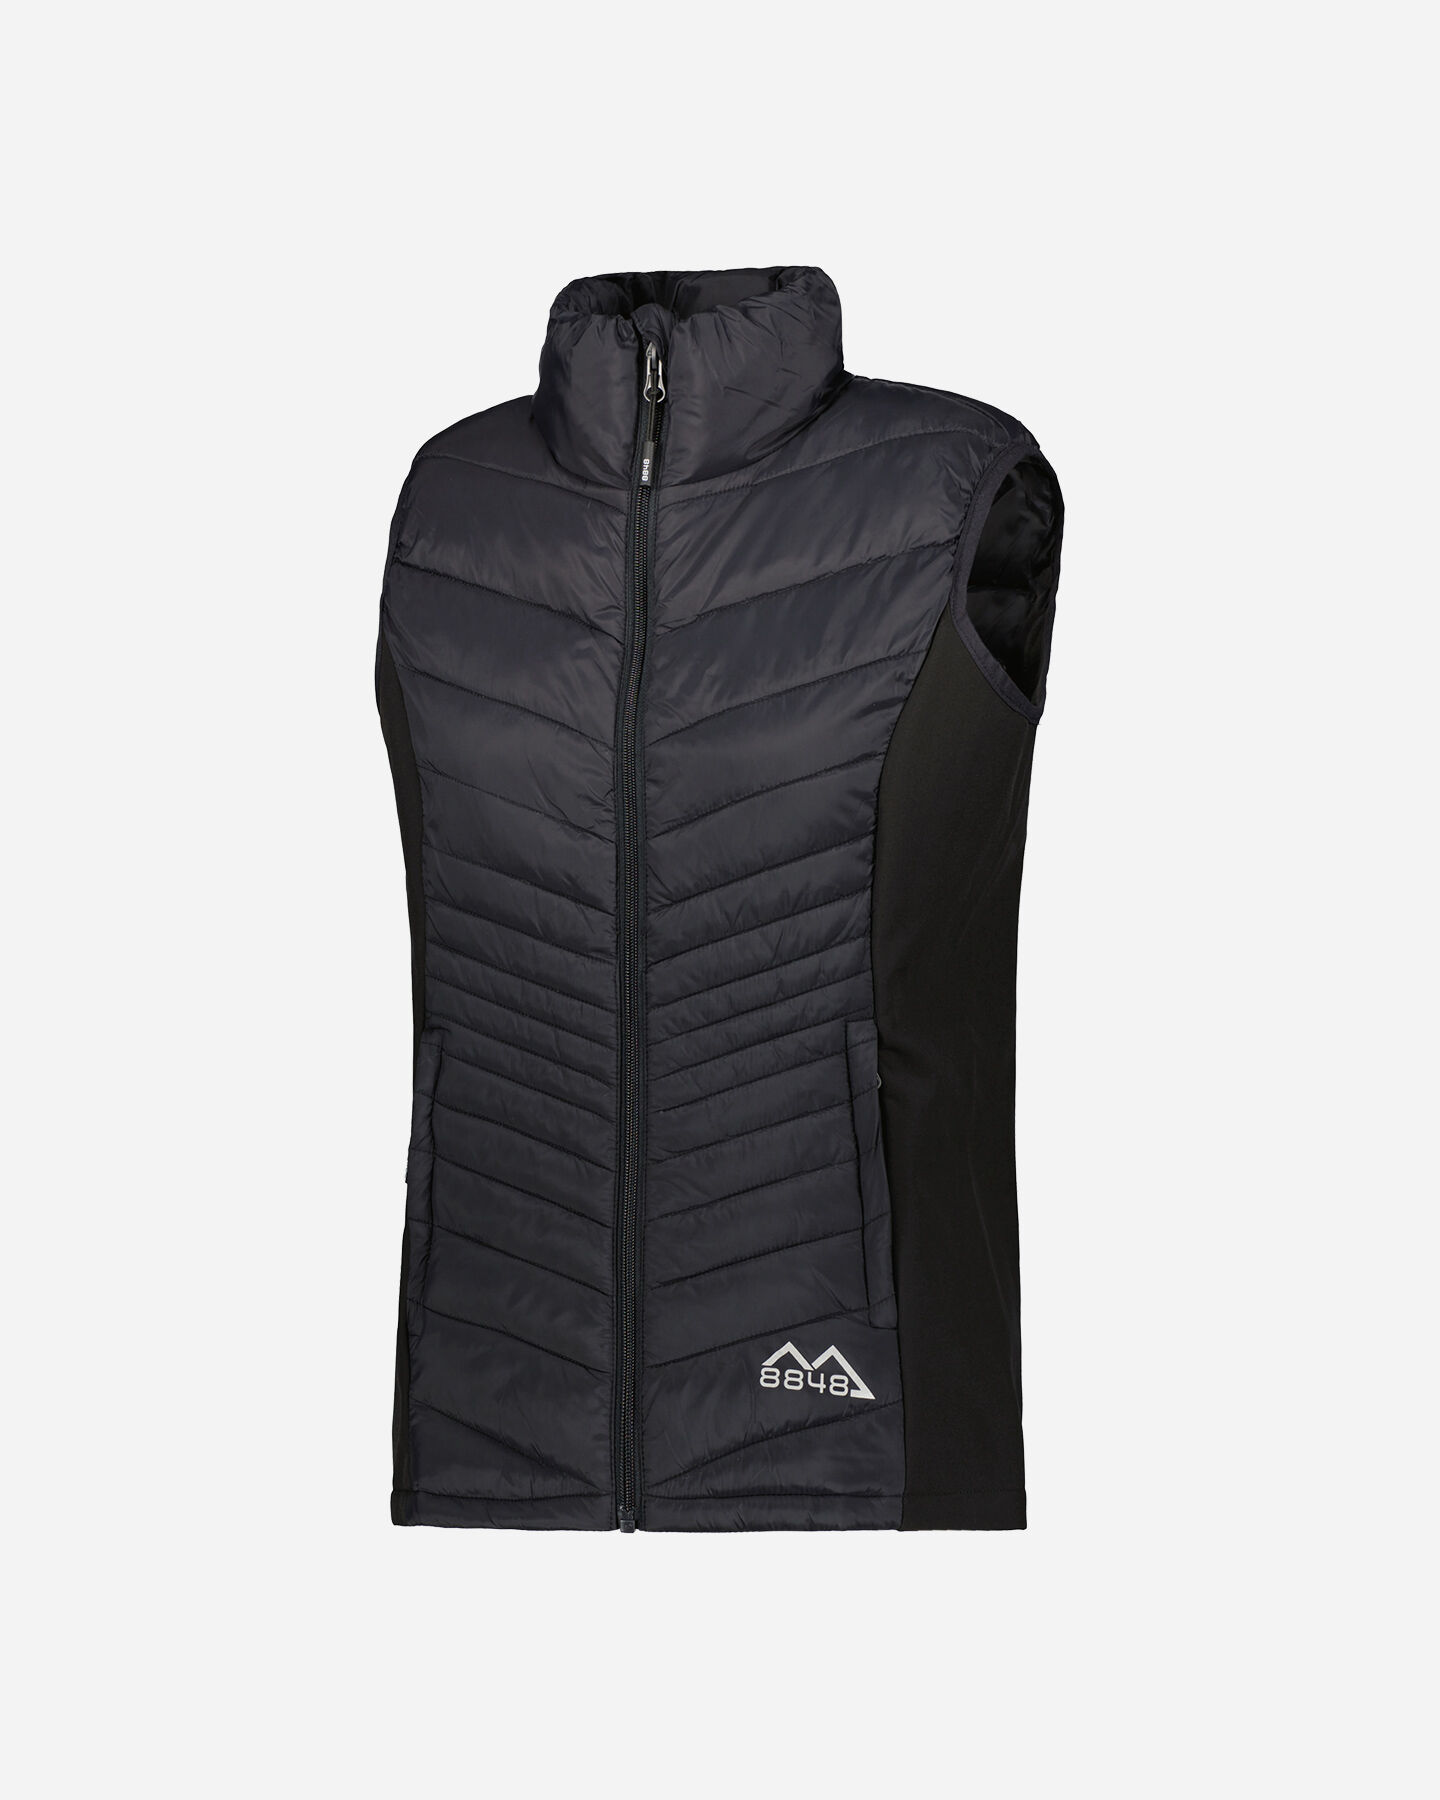  Gilet 8848 PADDED W S4109837 scatto 5